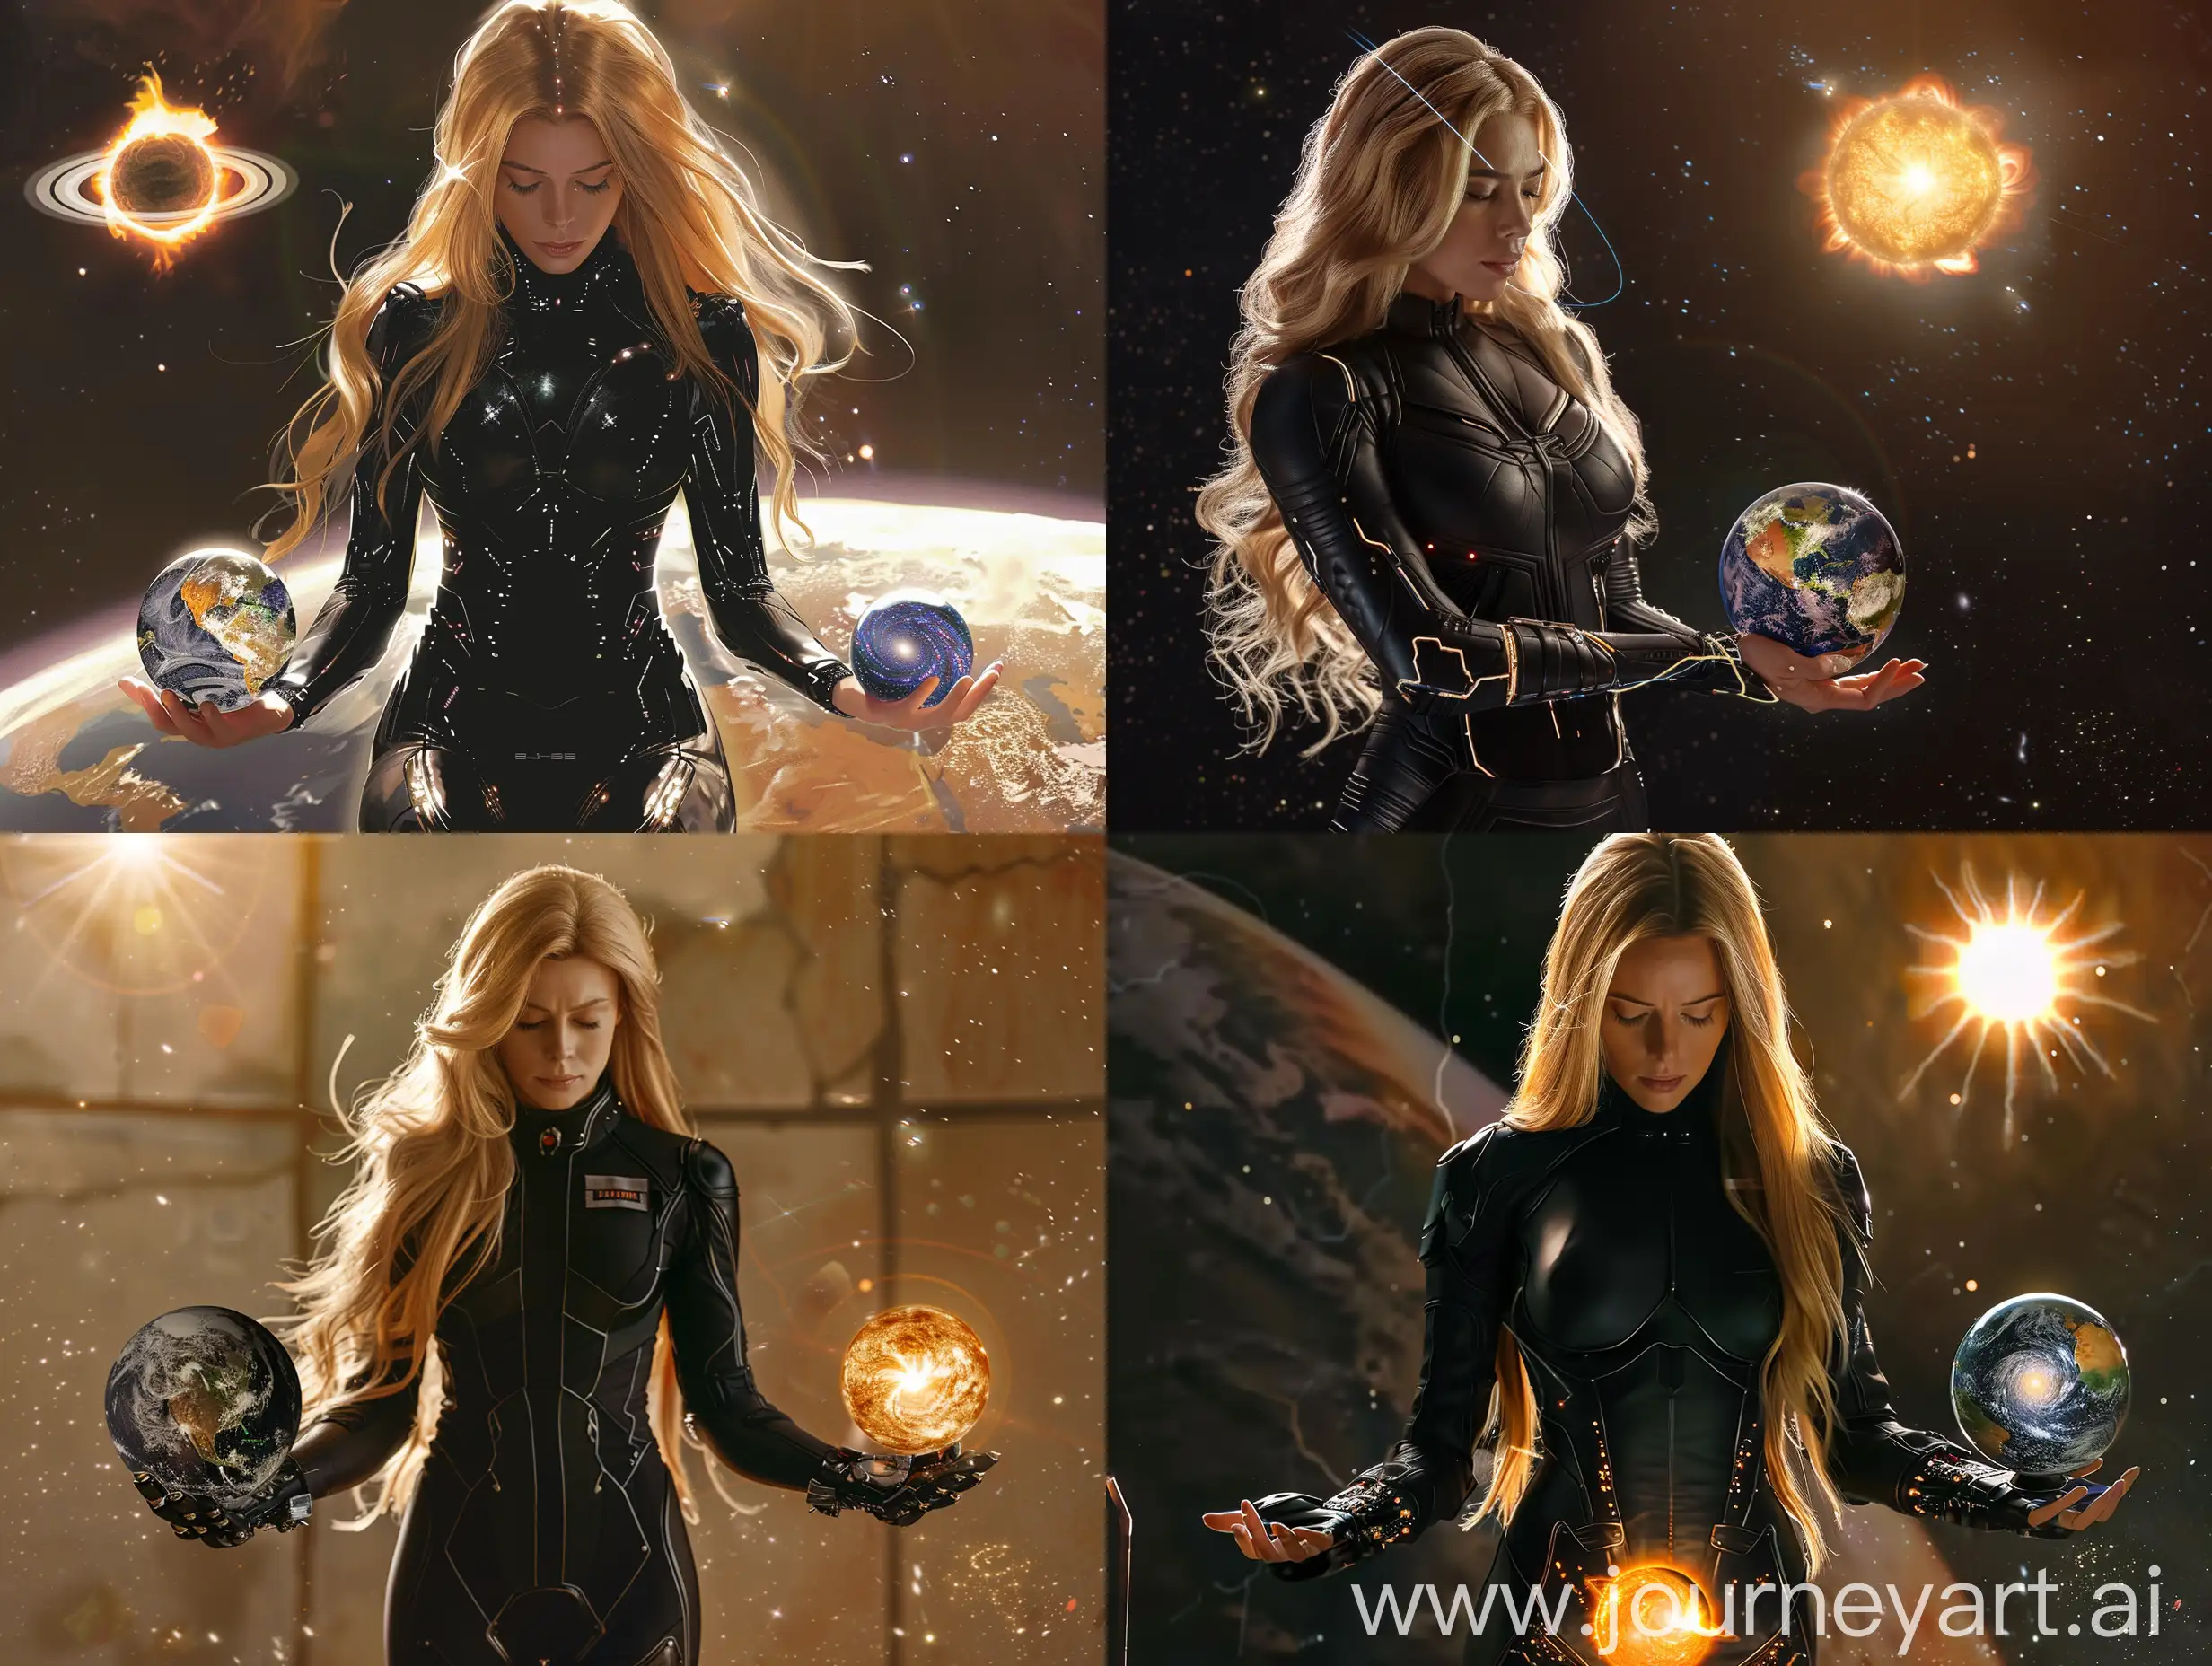 Scarlett Johansson with long blonde hair, in a size 85 open chest black spacesuit, a completely cybernetic or cyborg body, from a few billion years in the future, with a globe, a sun globe and a real galaxy in her hands watching it, with  8k quality, from the hips up with a beautiful bodybuilding body, from the front view of the body